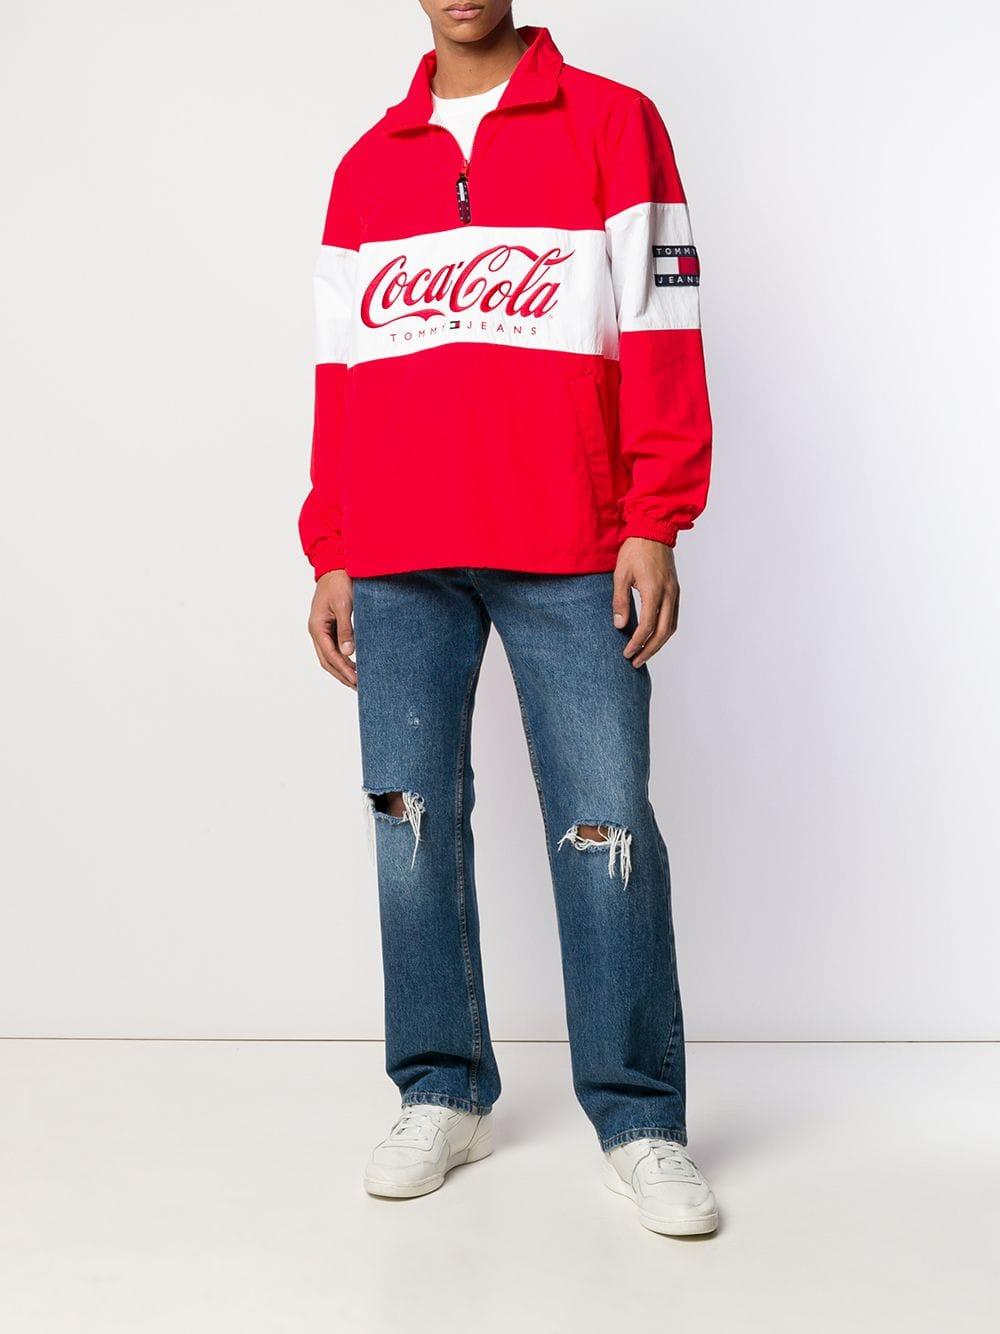 Tommy Hilfiger X Coca-cola Popover Jacket in Red for Men | Lyst Canada